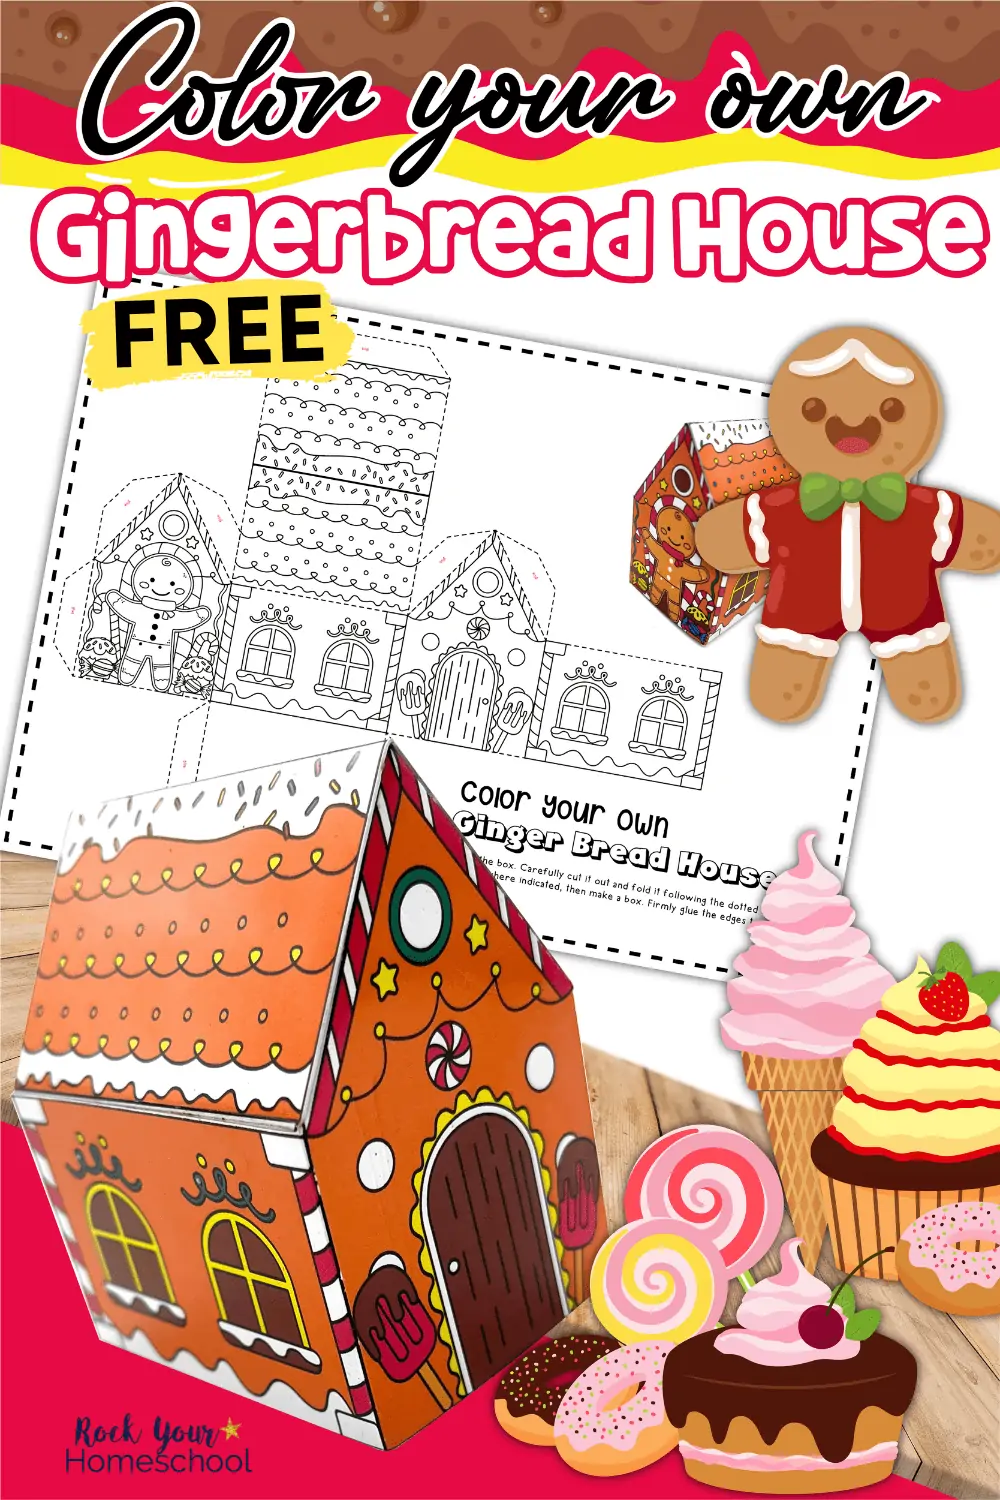 Gingerbread House Coloring Page for 3D DIY Holiday Fun (Free)